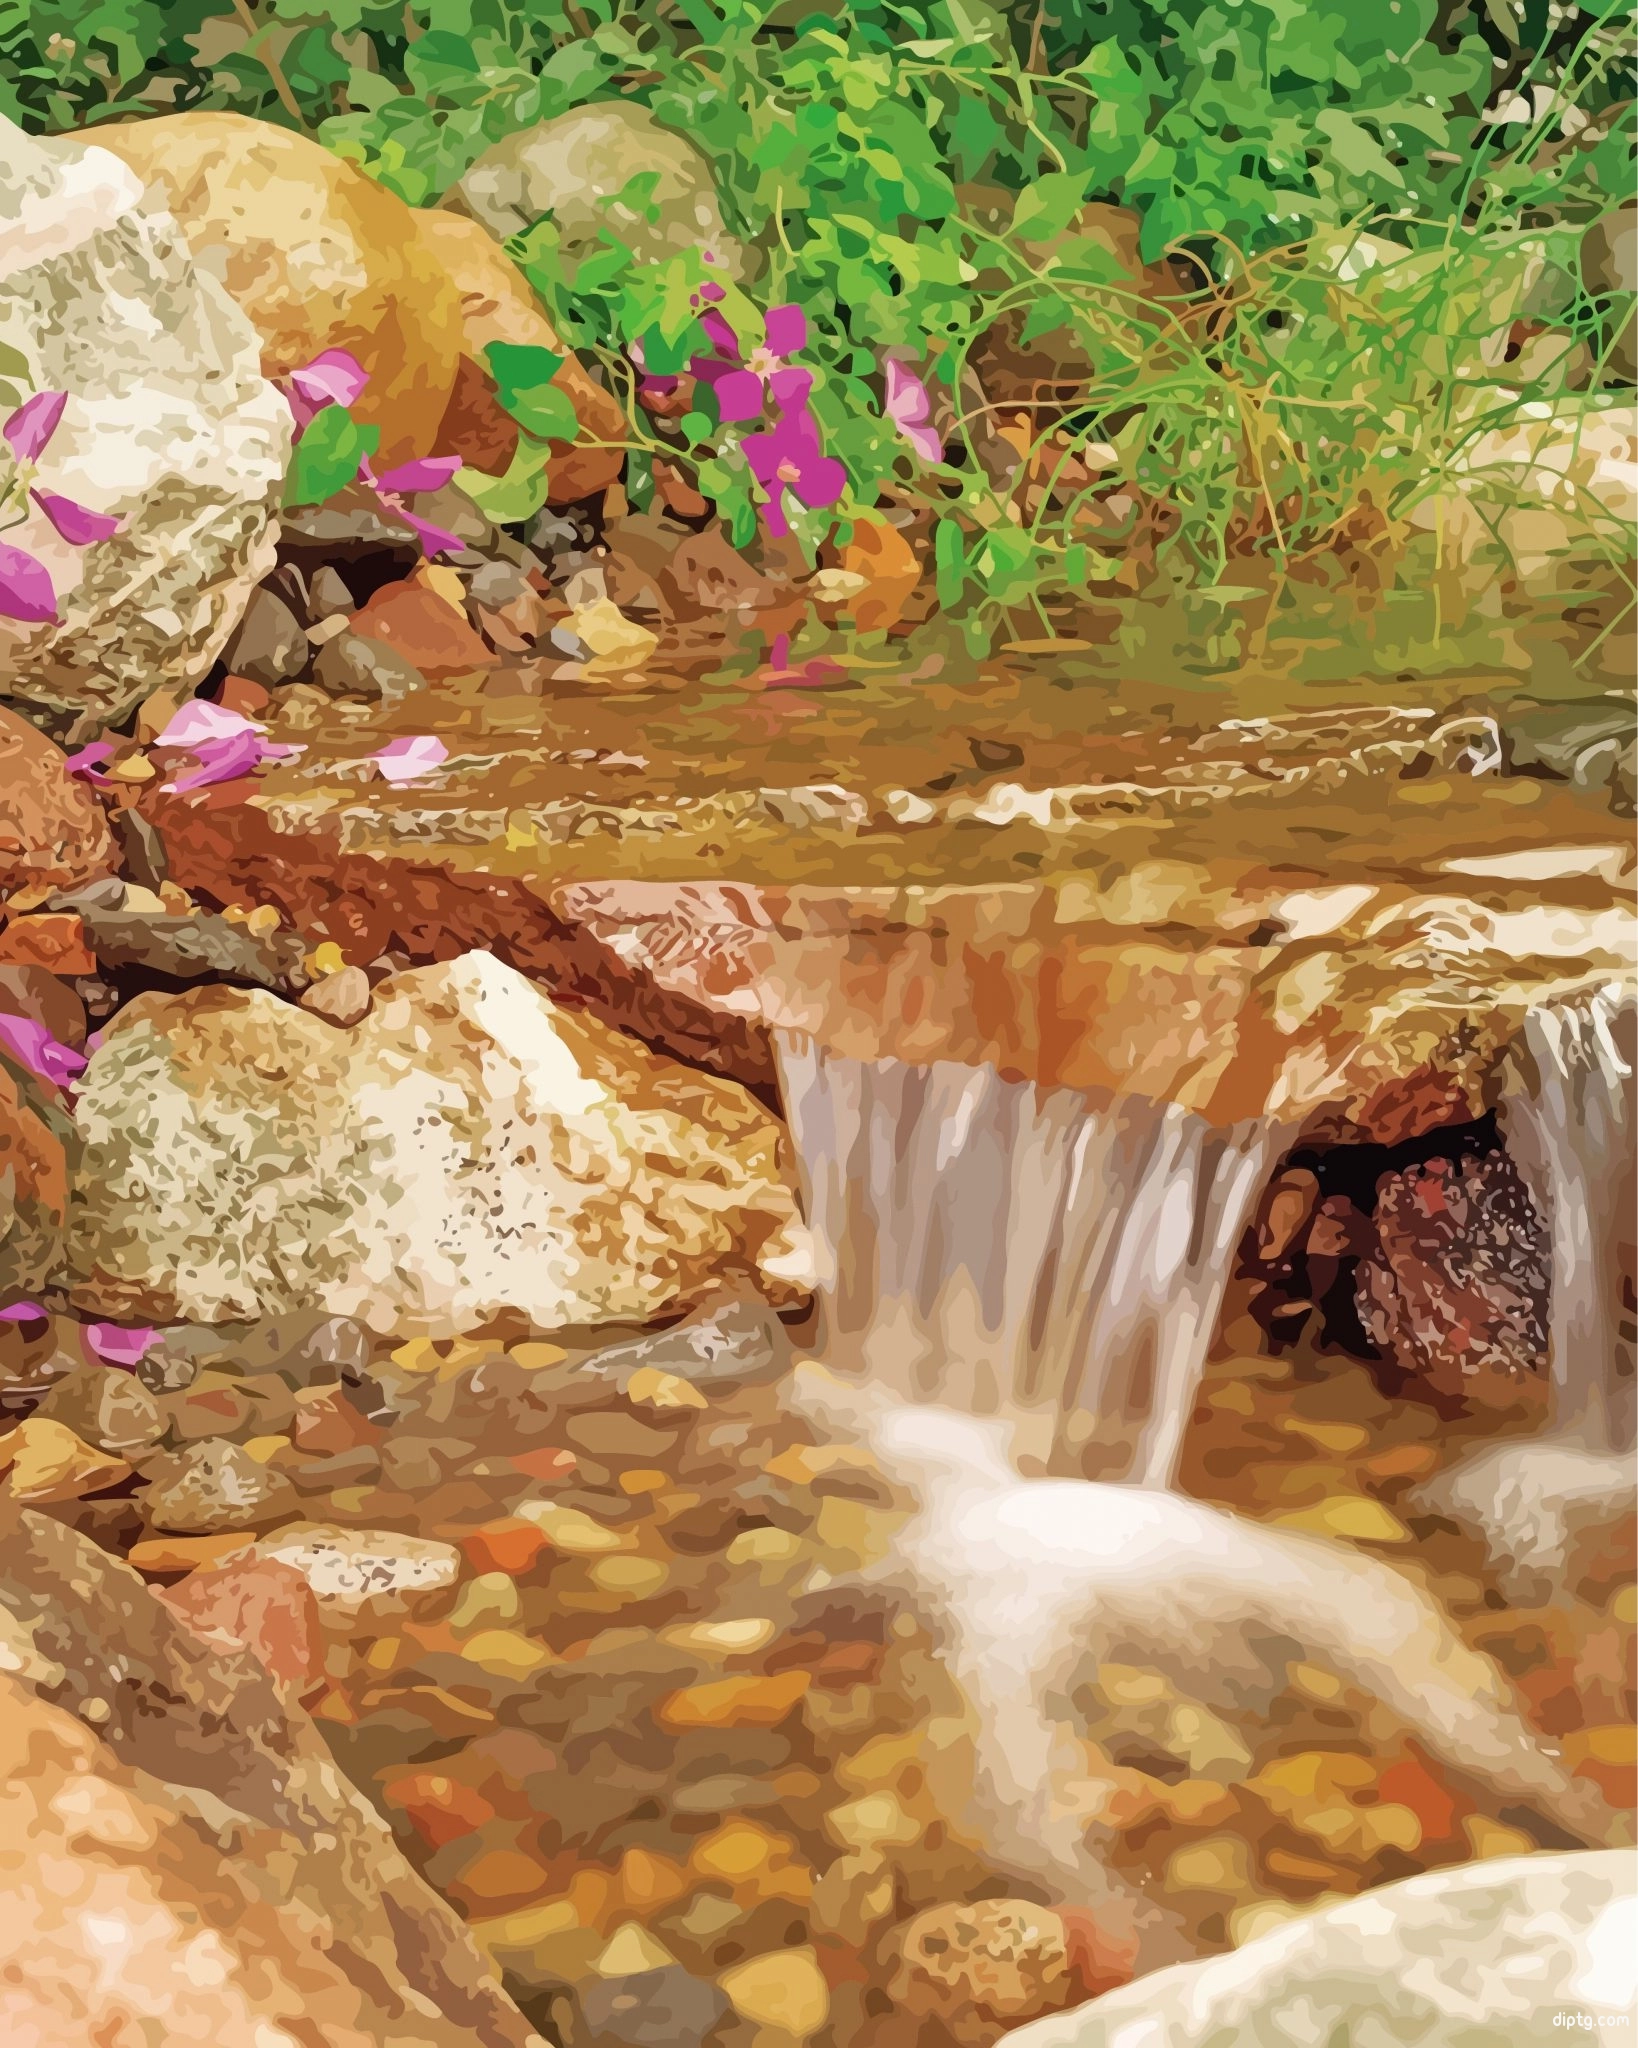 Stream With Waterfall Painting By Numbers Kits.jpg